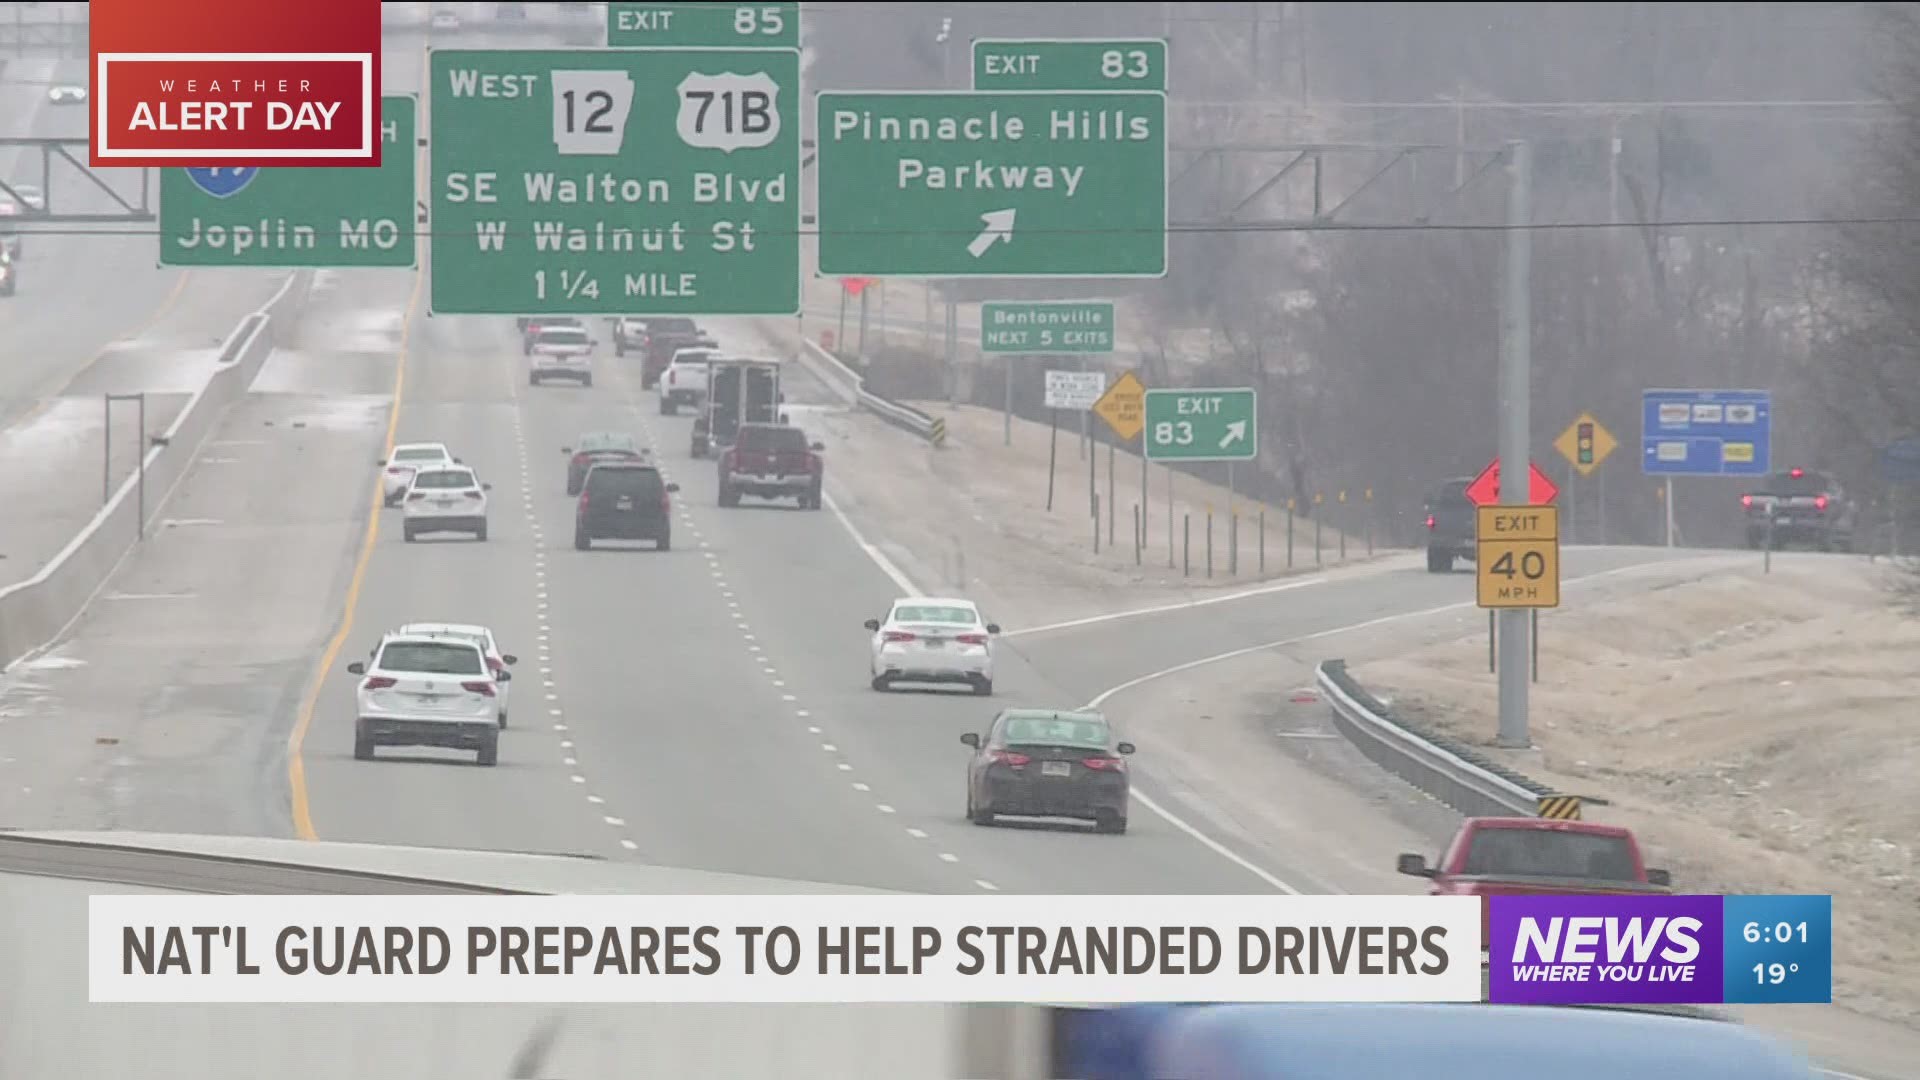 National Guard prepares to help stranded drivers during winter weather